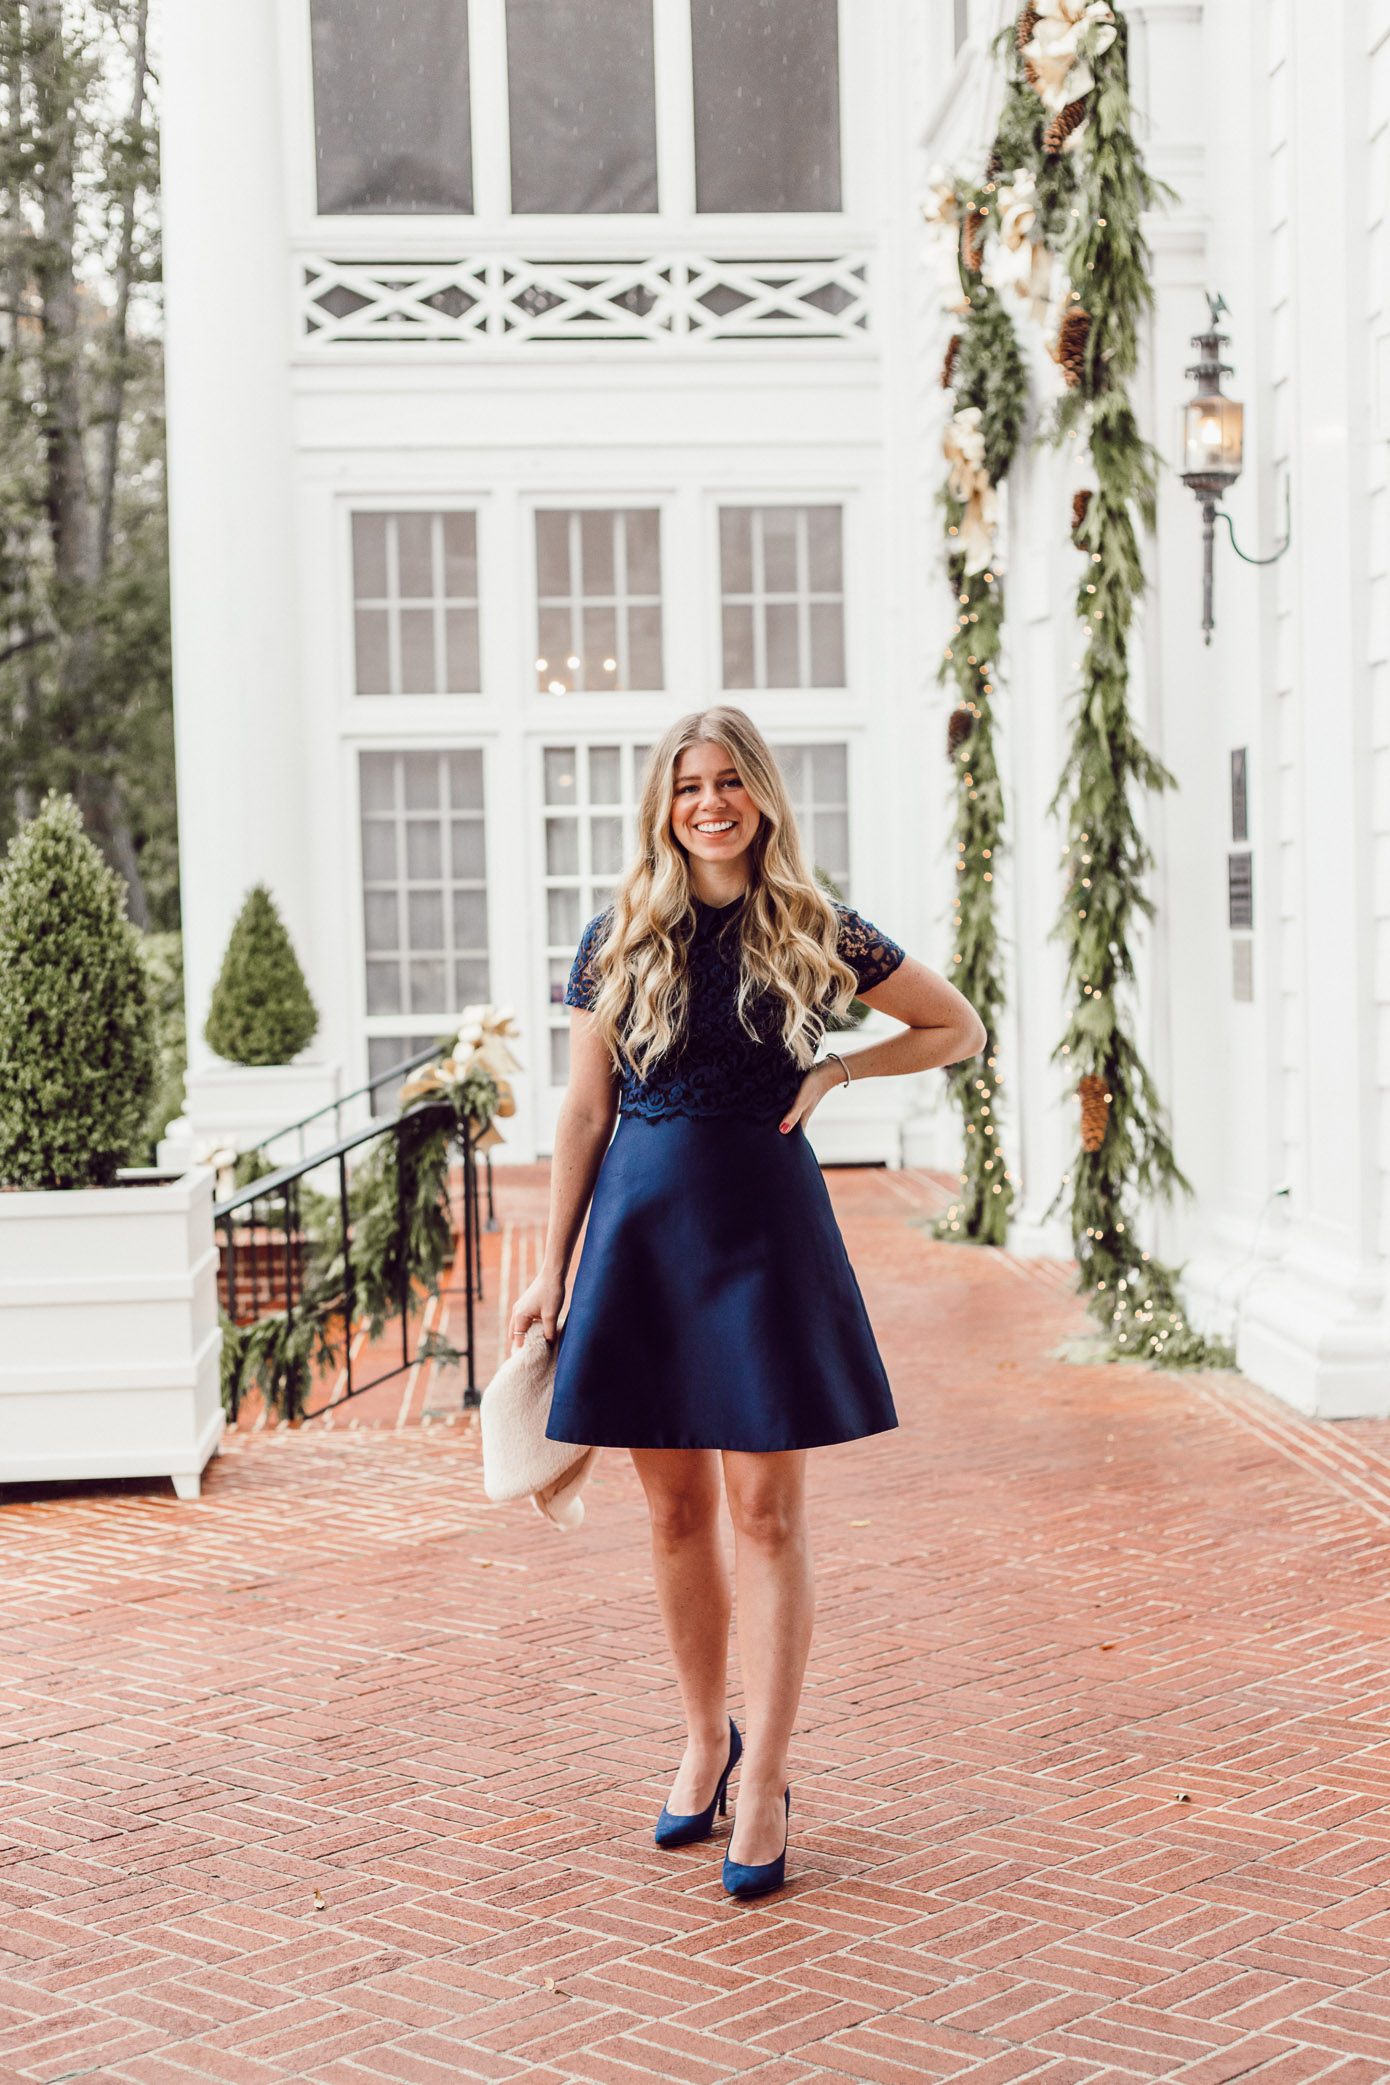 Finding the Perfect Holiday Party Dress with Rent the Runway on Louella Reese Blog | Navy Lace Mini Dress, Christmas Party Dress